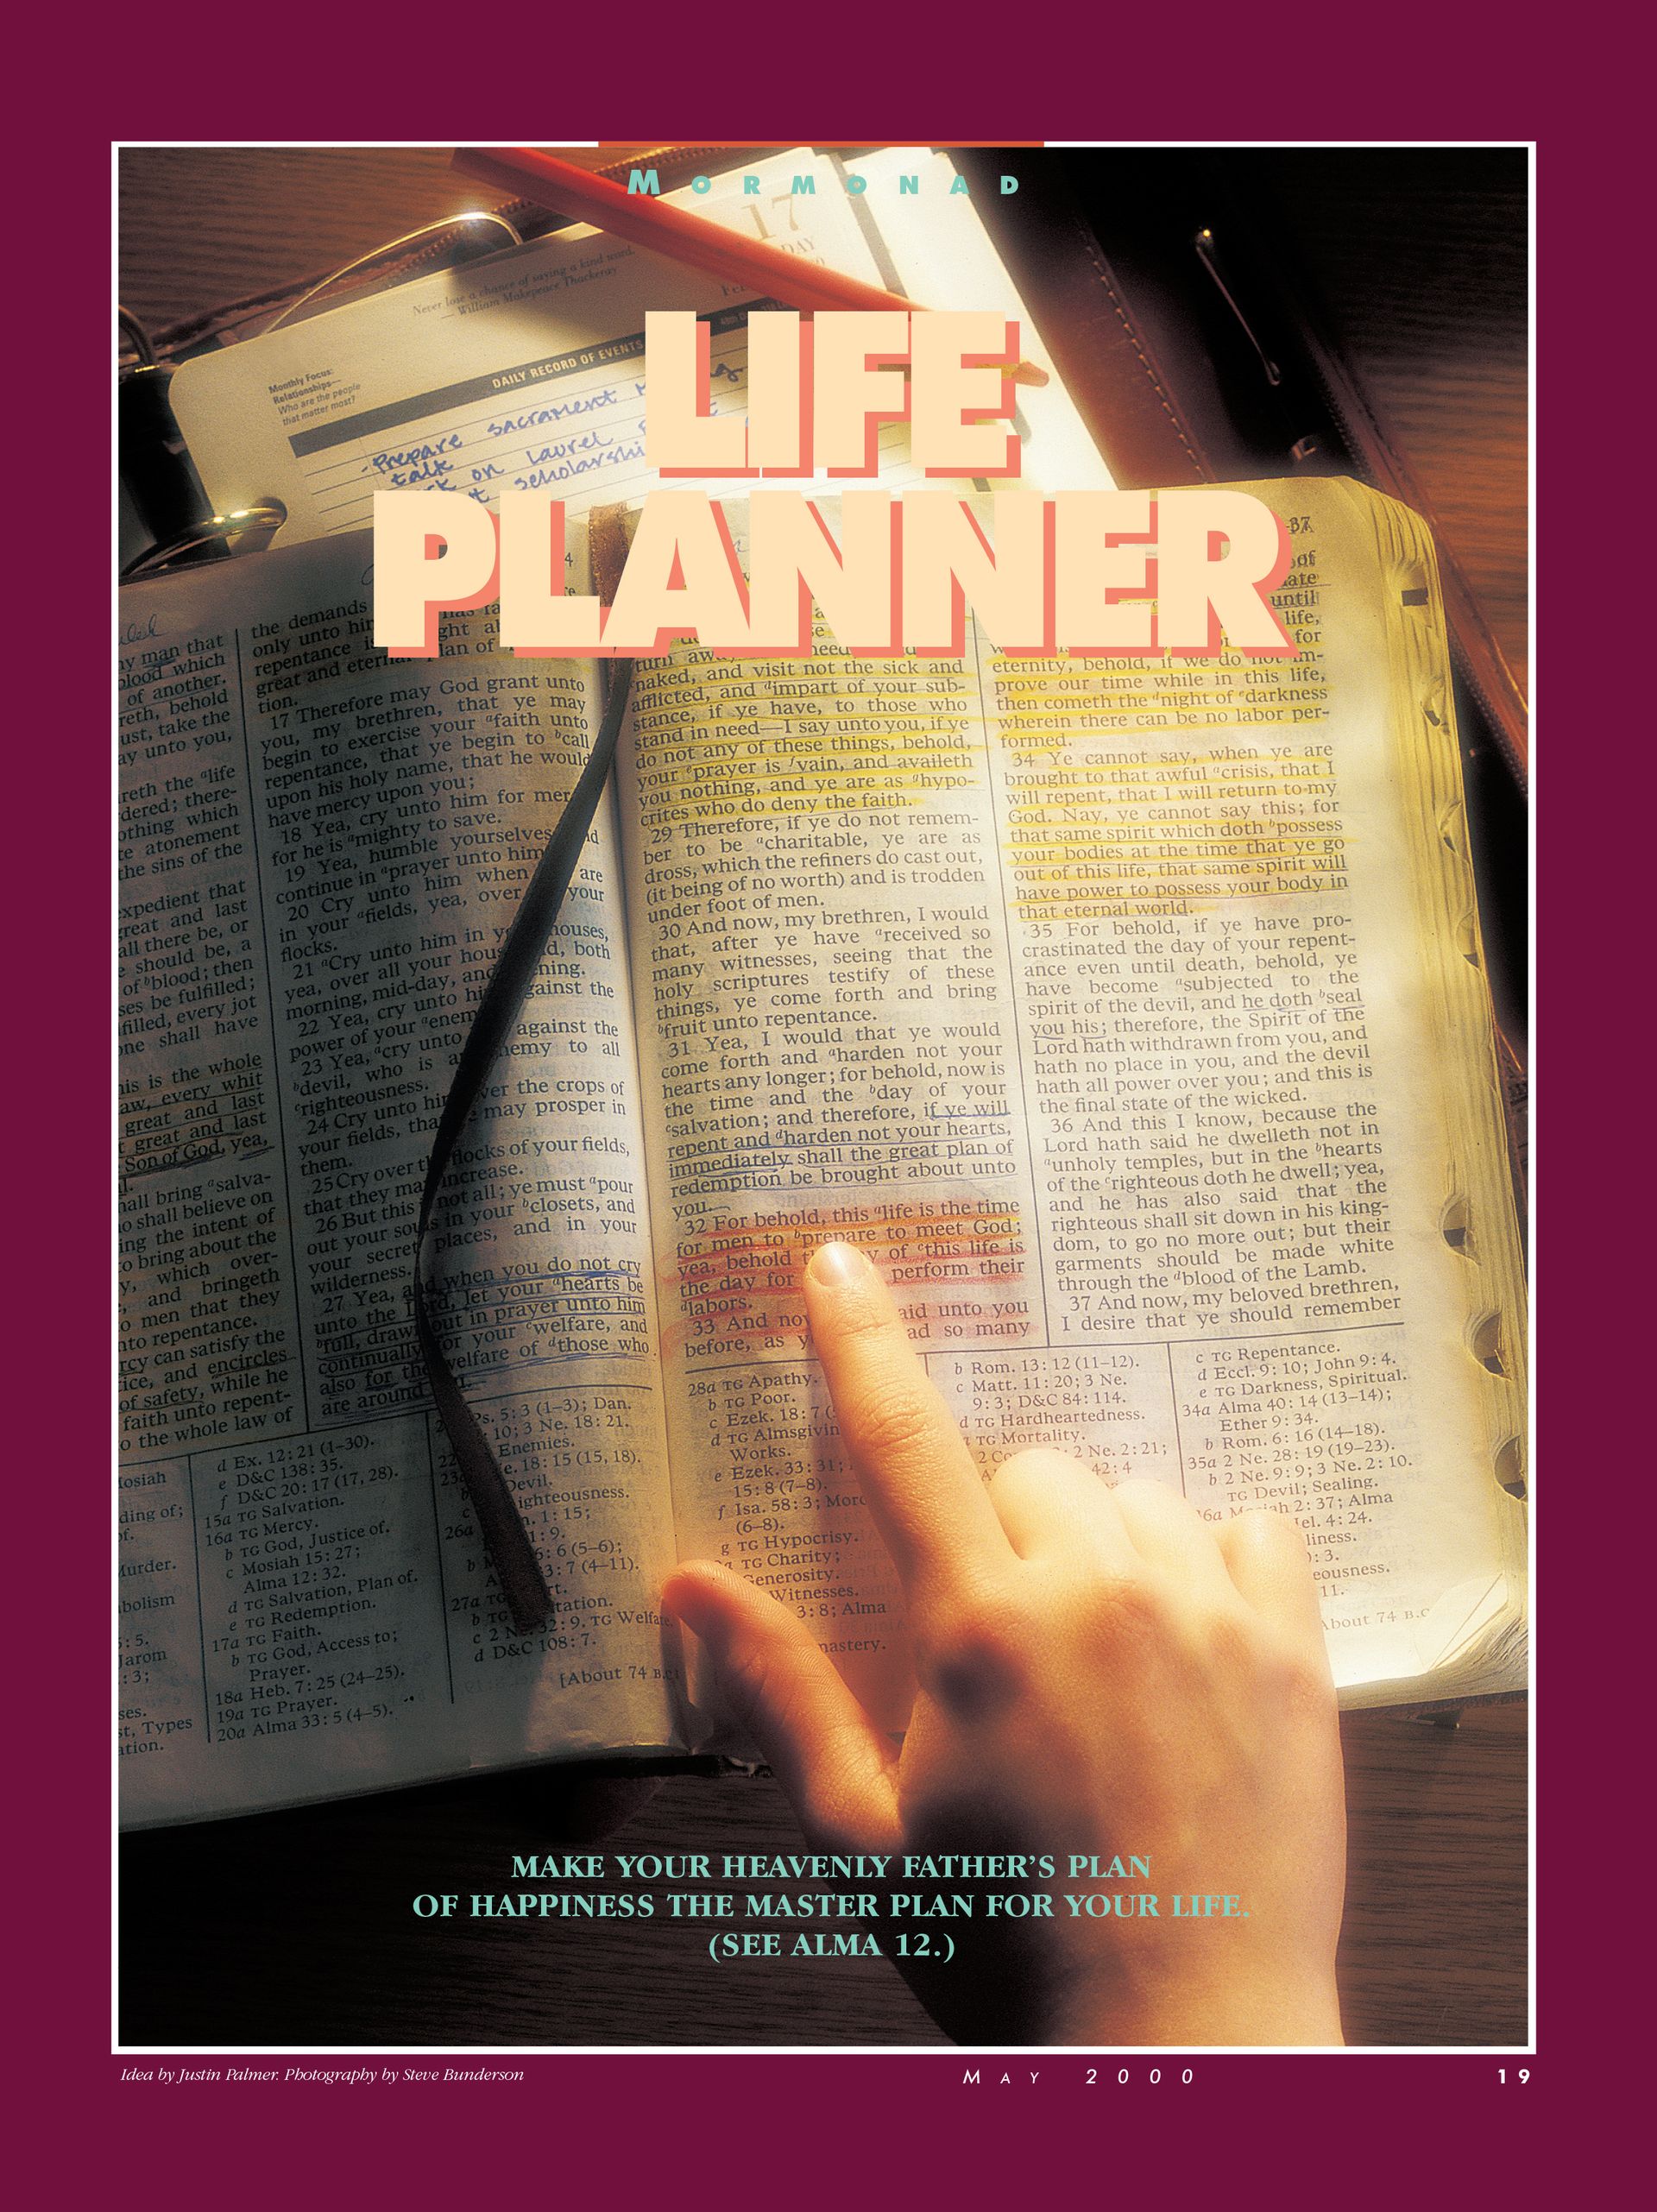 Life Planner. Make your Heavenly Father’s plan of happiness the master plan for your life. (See Alma 12.) May 2000 © undefined ipCode 1.